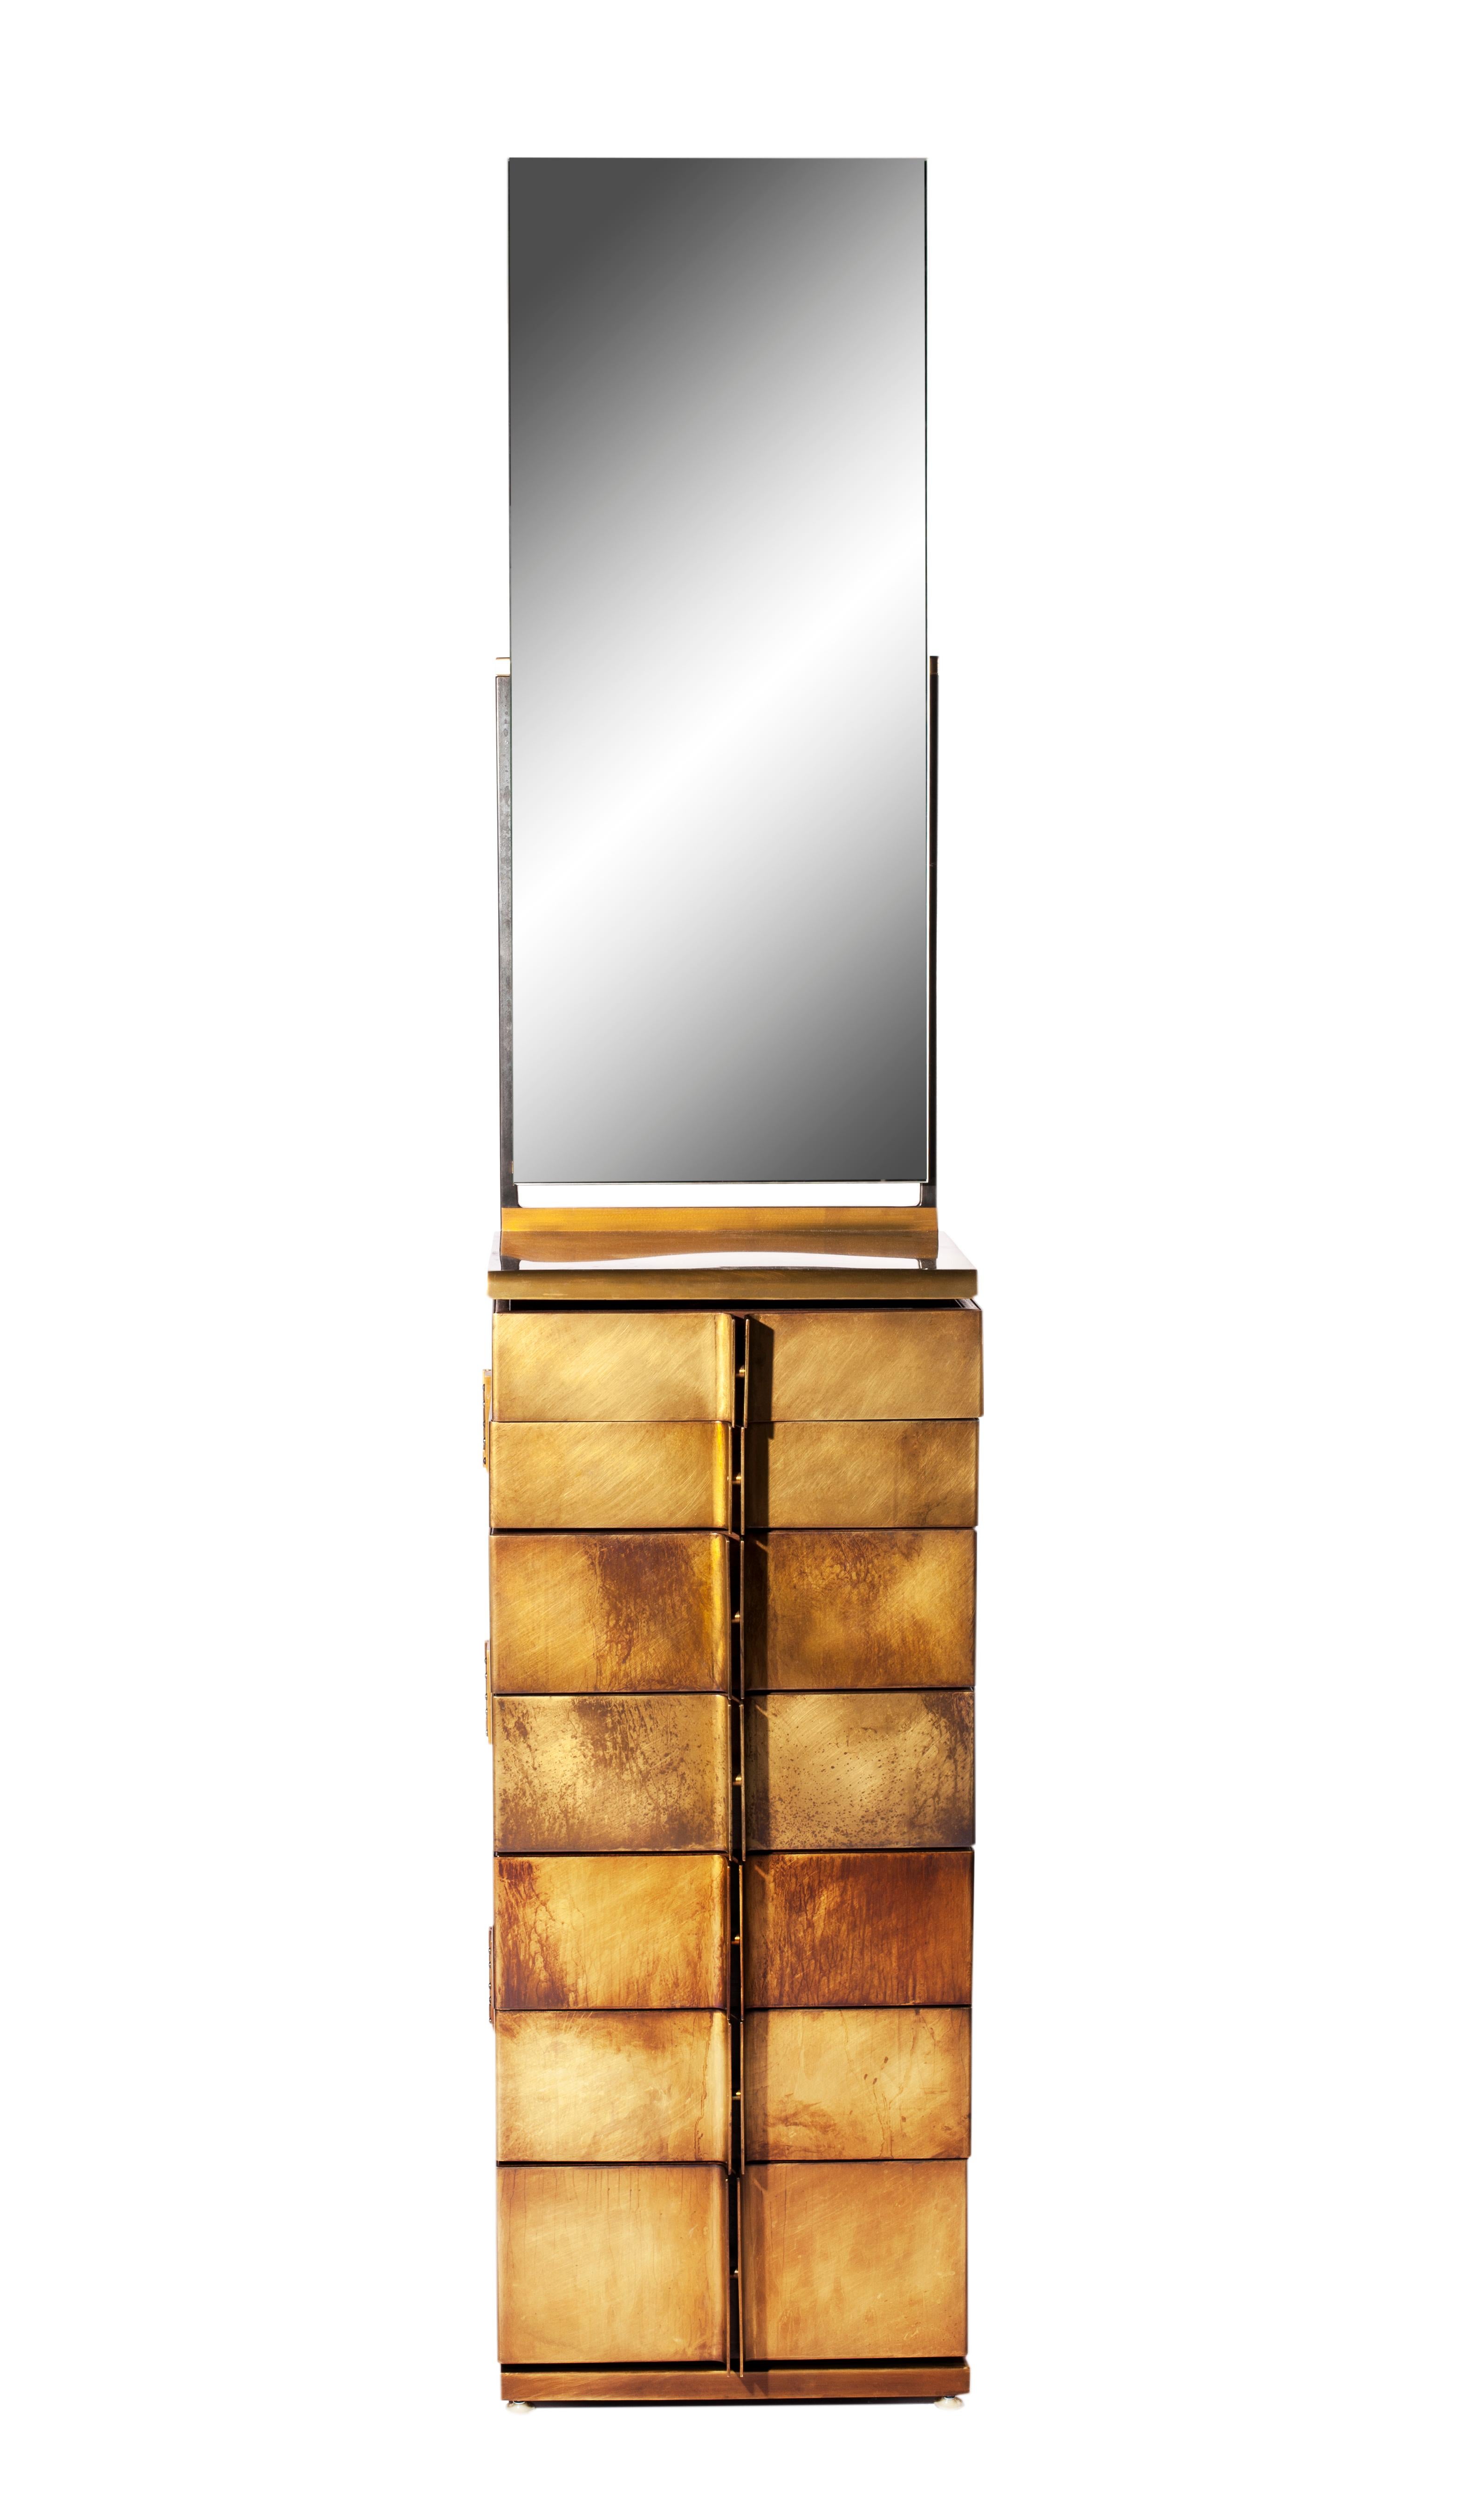 Semainier brass and walnut dresser by Gentner Design
Dimensions: D 35.5 x W 45.7 x H 218 cm
Materials: patinated brass, walnut wood

A modern take on a semainier, complete with vanity mirror and nine variable depth drawers, provides ample